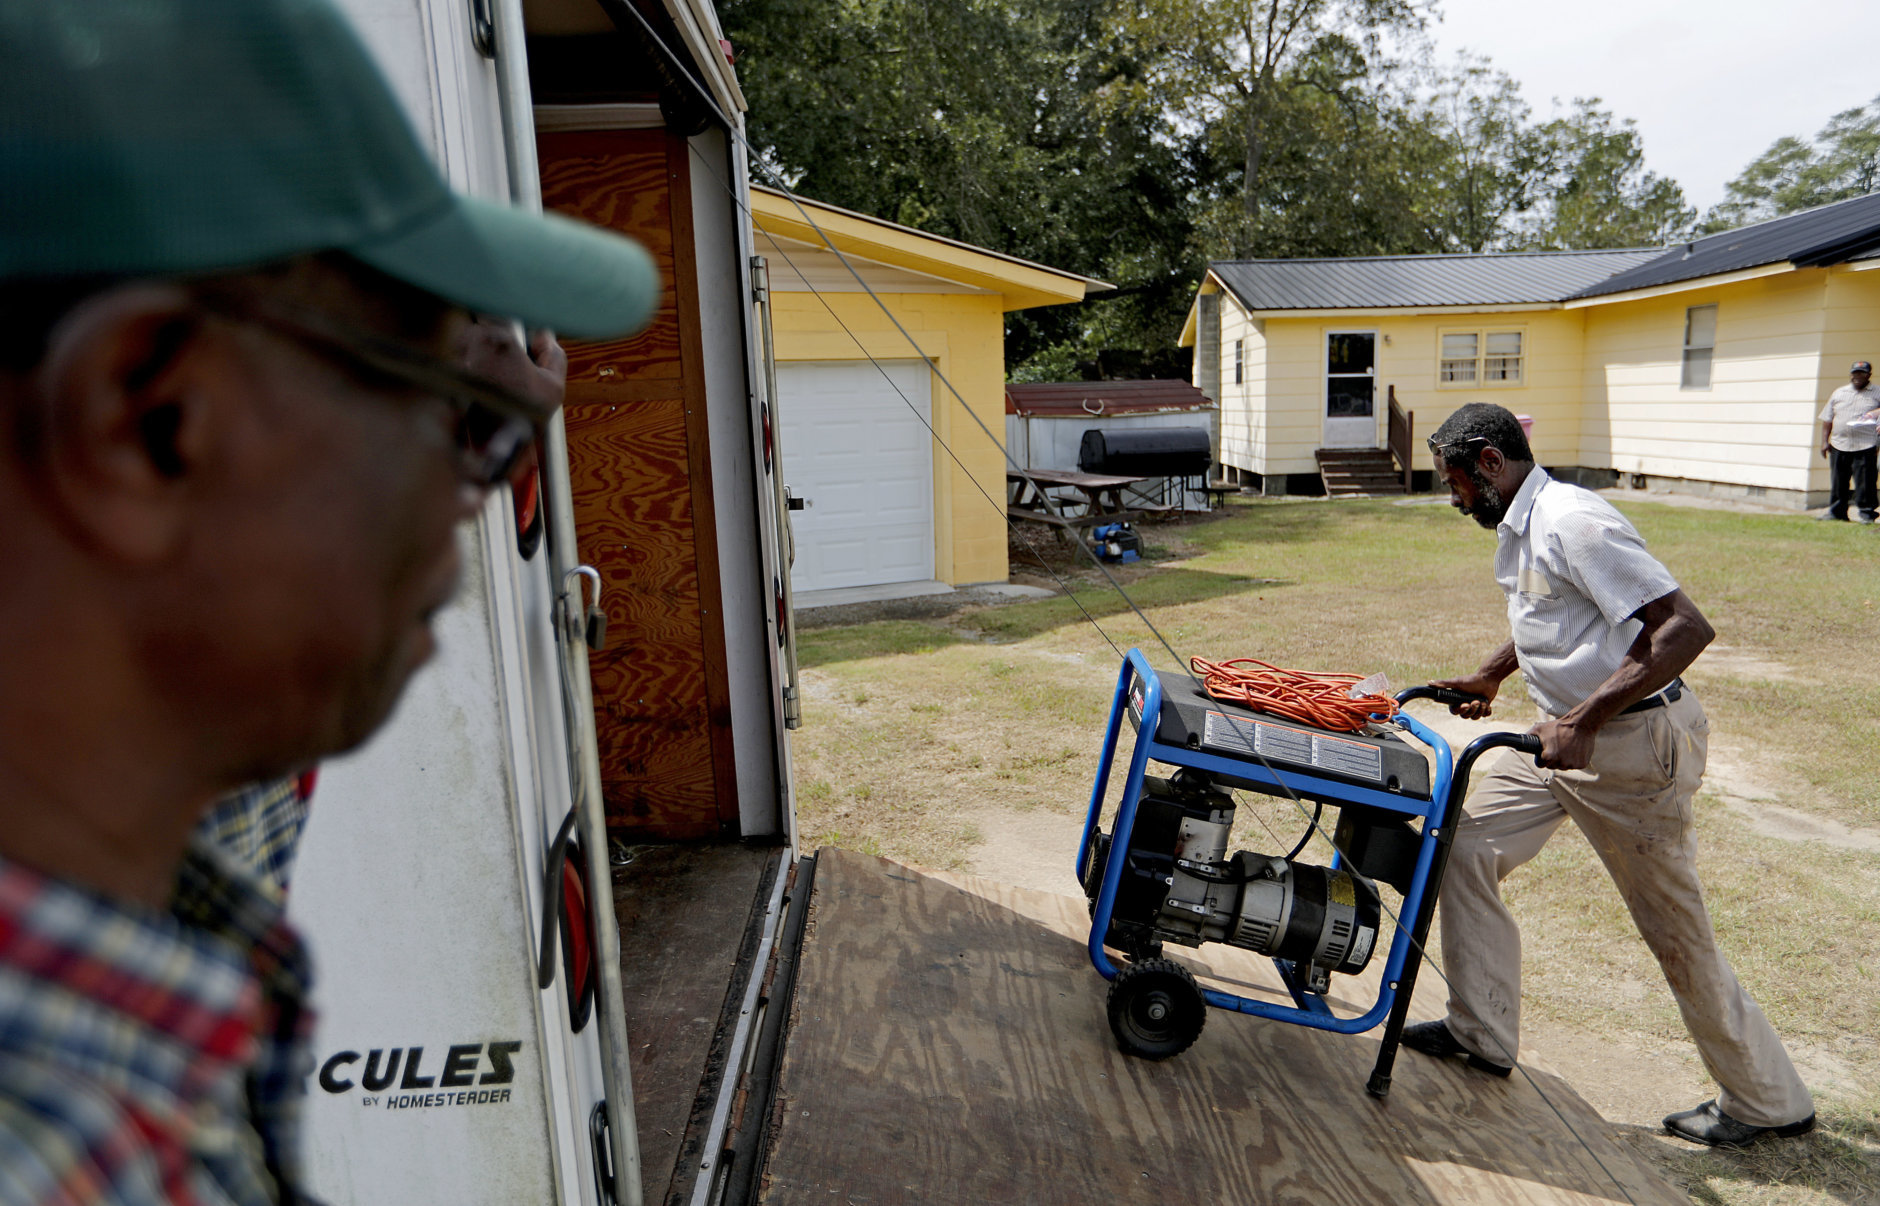 Stoney Williamson, right, unloads a generator for his brother-in-law, rear, whose home flooded two years ago from Hurricane Matthew, as Harry Campbell, left, looks on in Nichols, S.C., Thursday, Sept. 13, 2018, as Hurricane Florence approaches the east coast. (AP Photo/David Goldman)